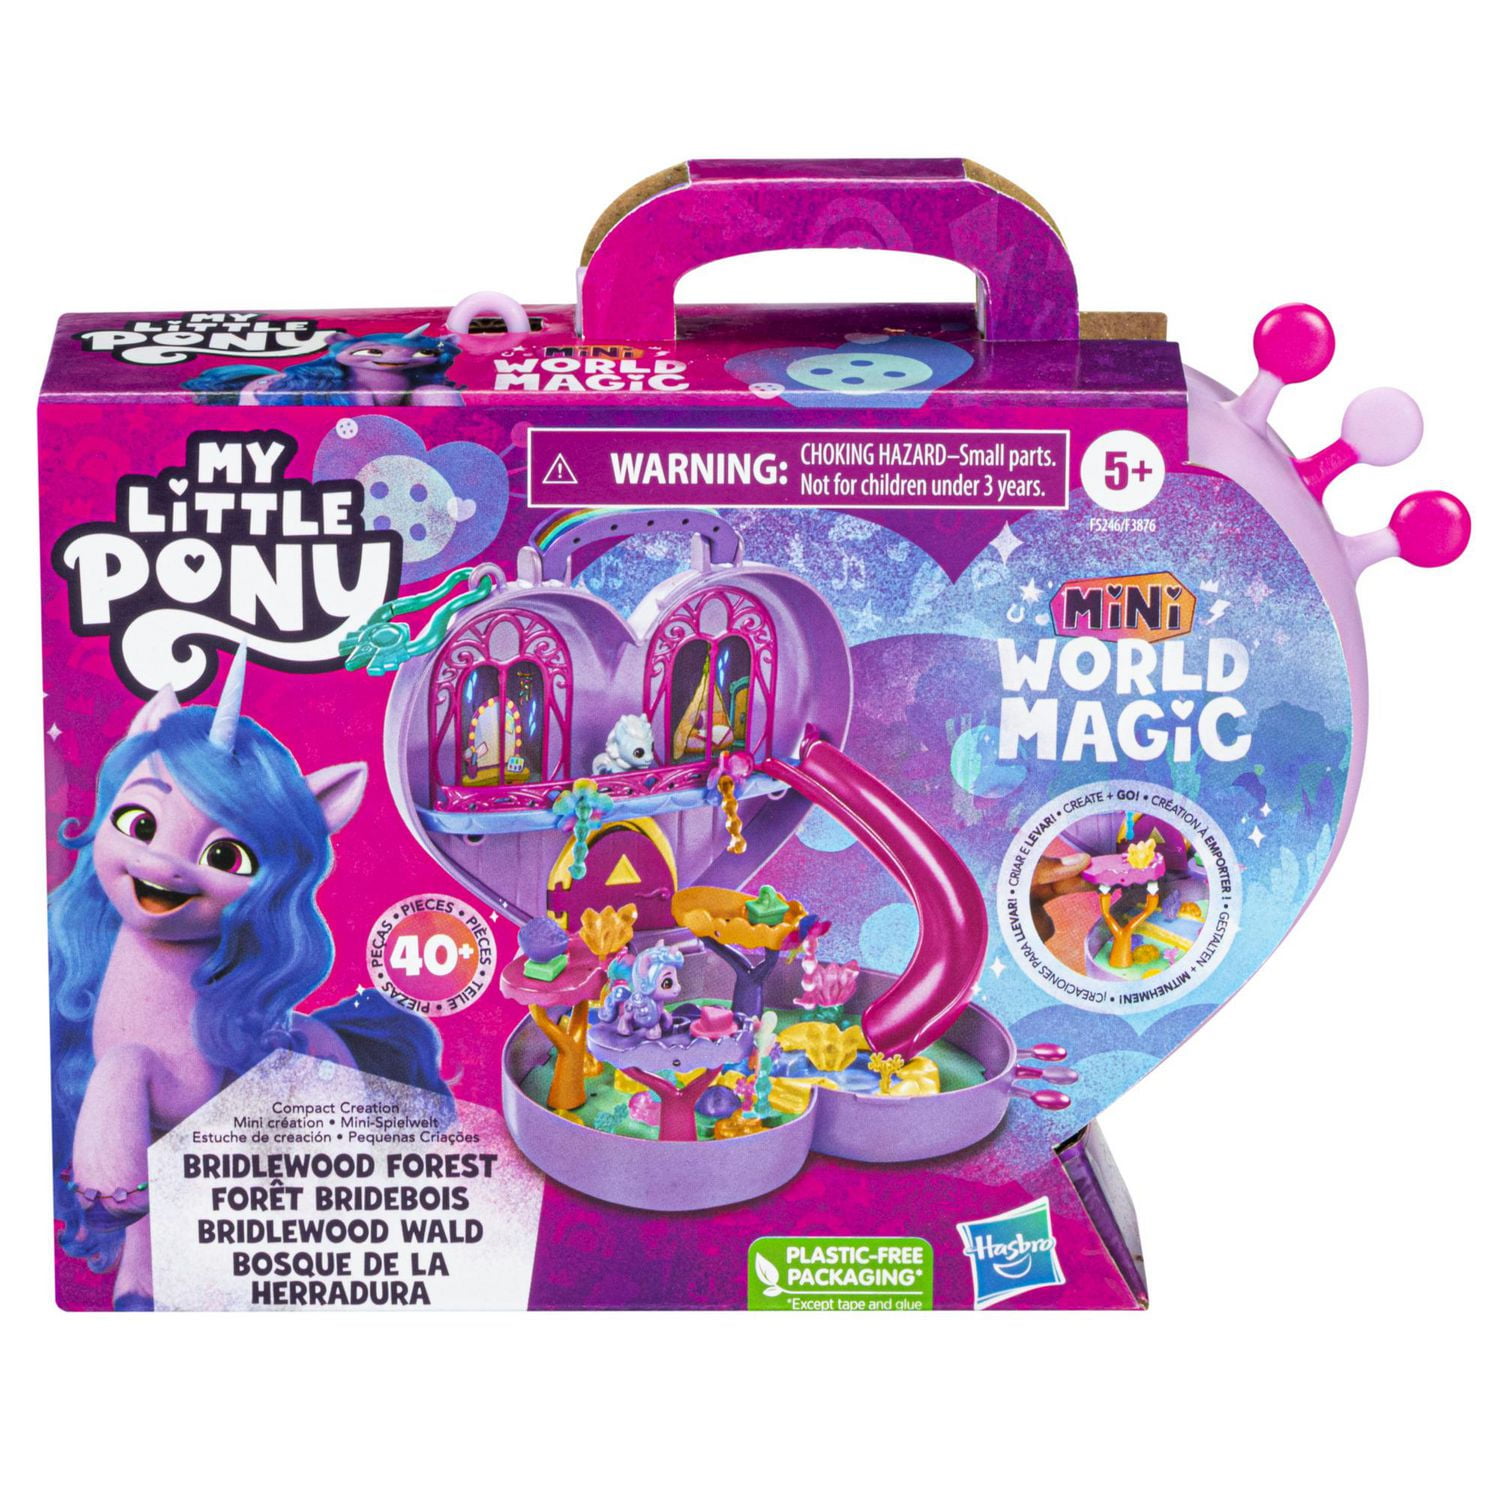 My Little Pony Mini World Magic Compact Creation Bridlewood Forest Toy -  Portable Playset with Izzy Moonbow Pony, Ages 5 and up 